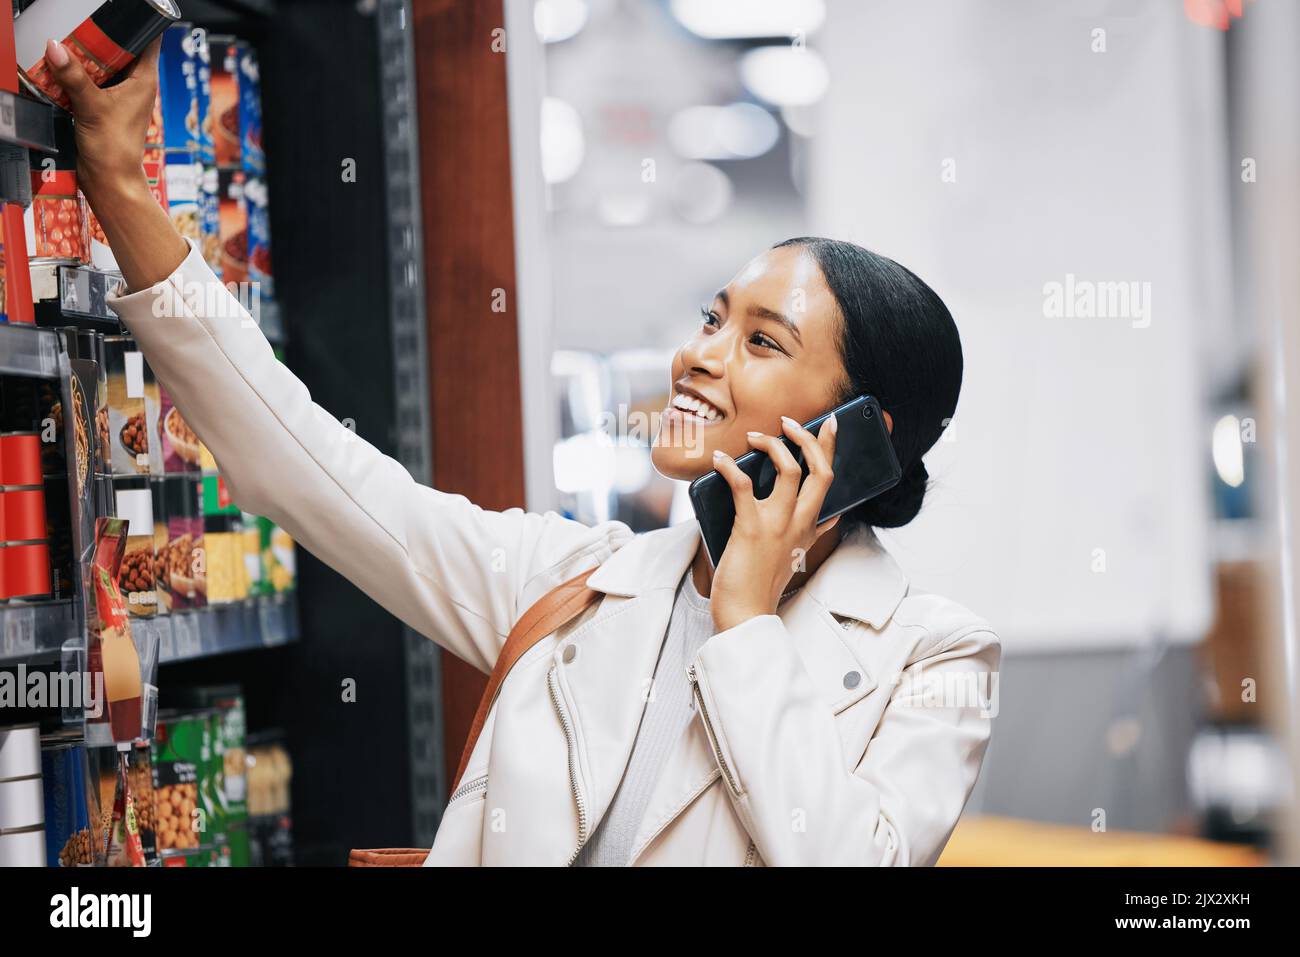 Happy supermarket, grocery shopping and customer with 5g phone, smile and in retail store for food, groceries or product from shelf. Woman with Stock Photo